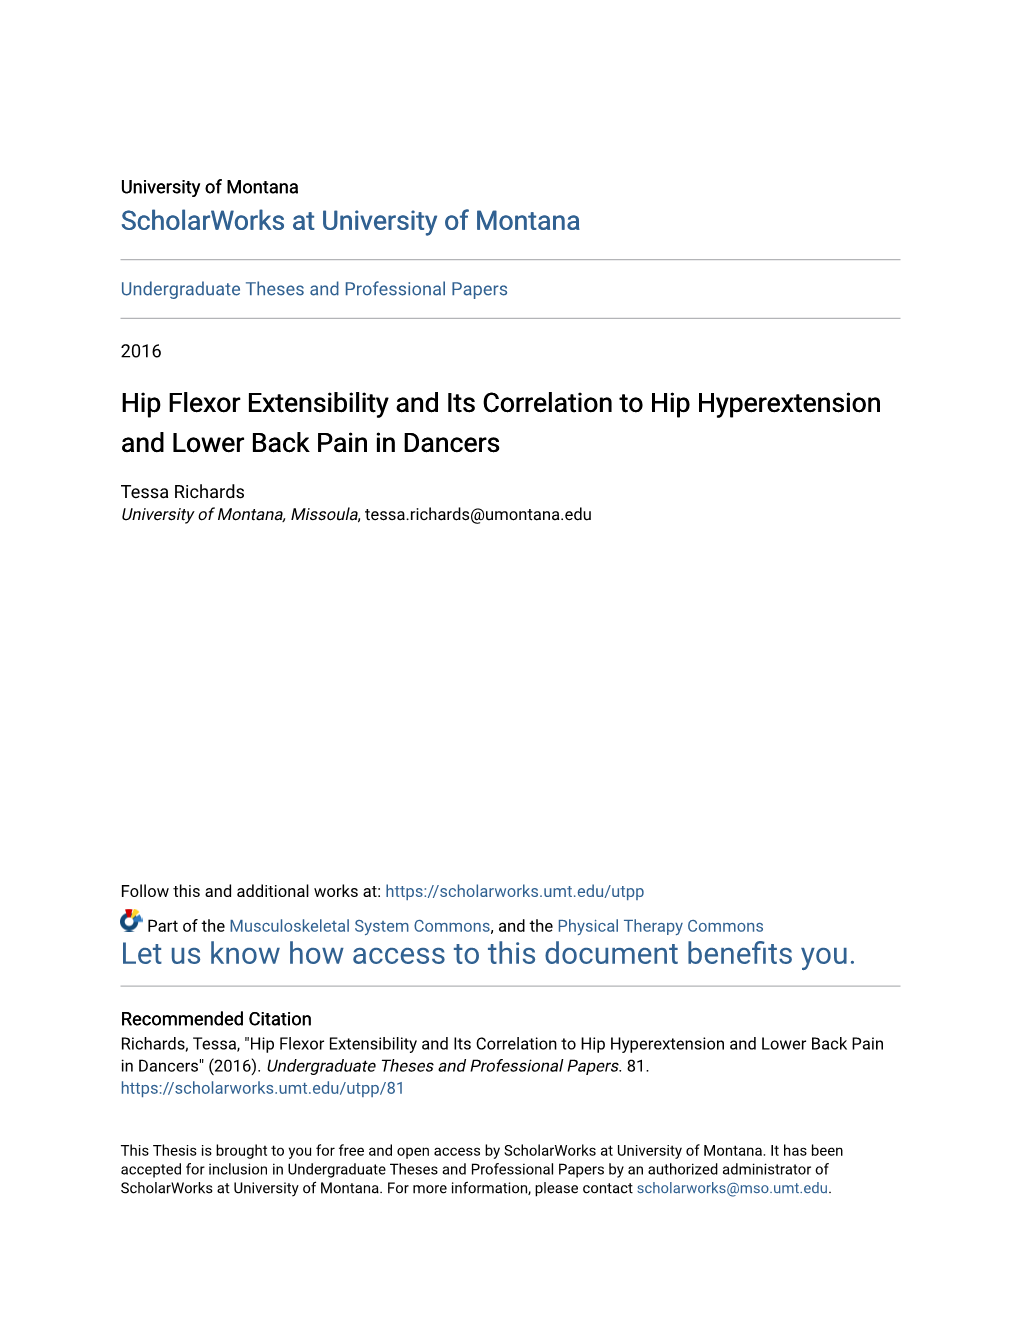 Hip Flexor Extensibility and Its Correlation to Hip Hyperextension and Lower Back Pain in Dancers